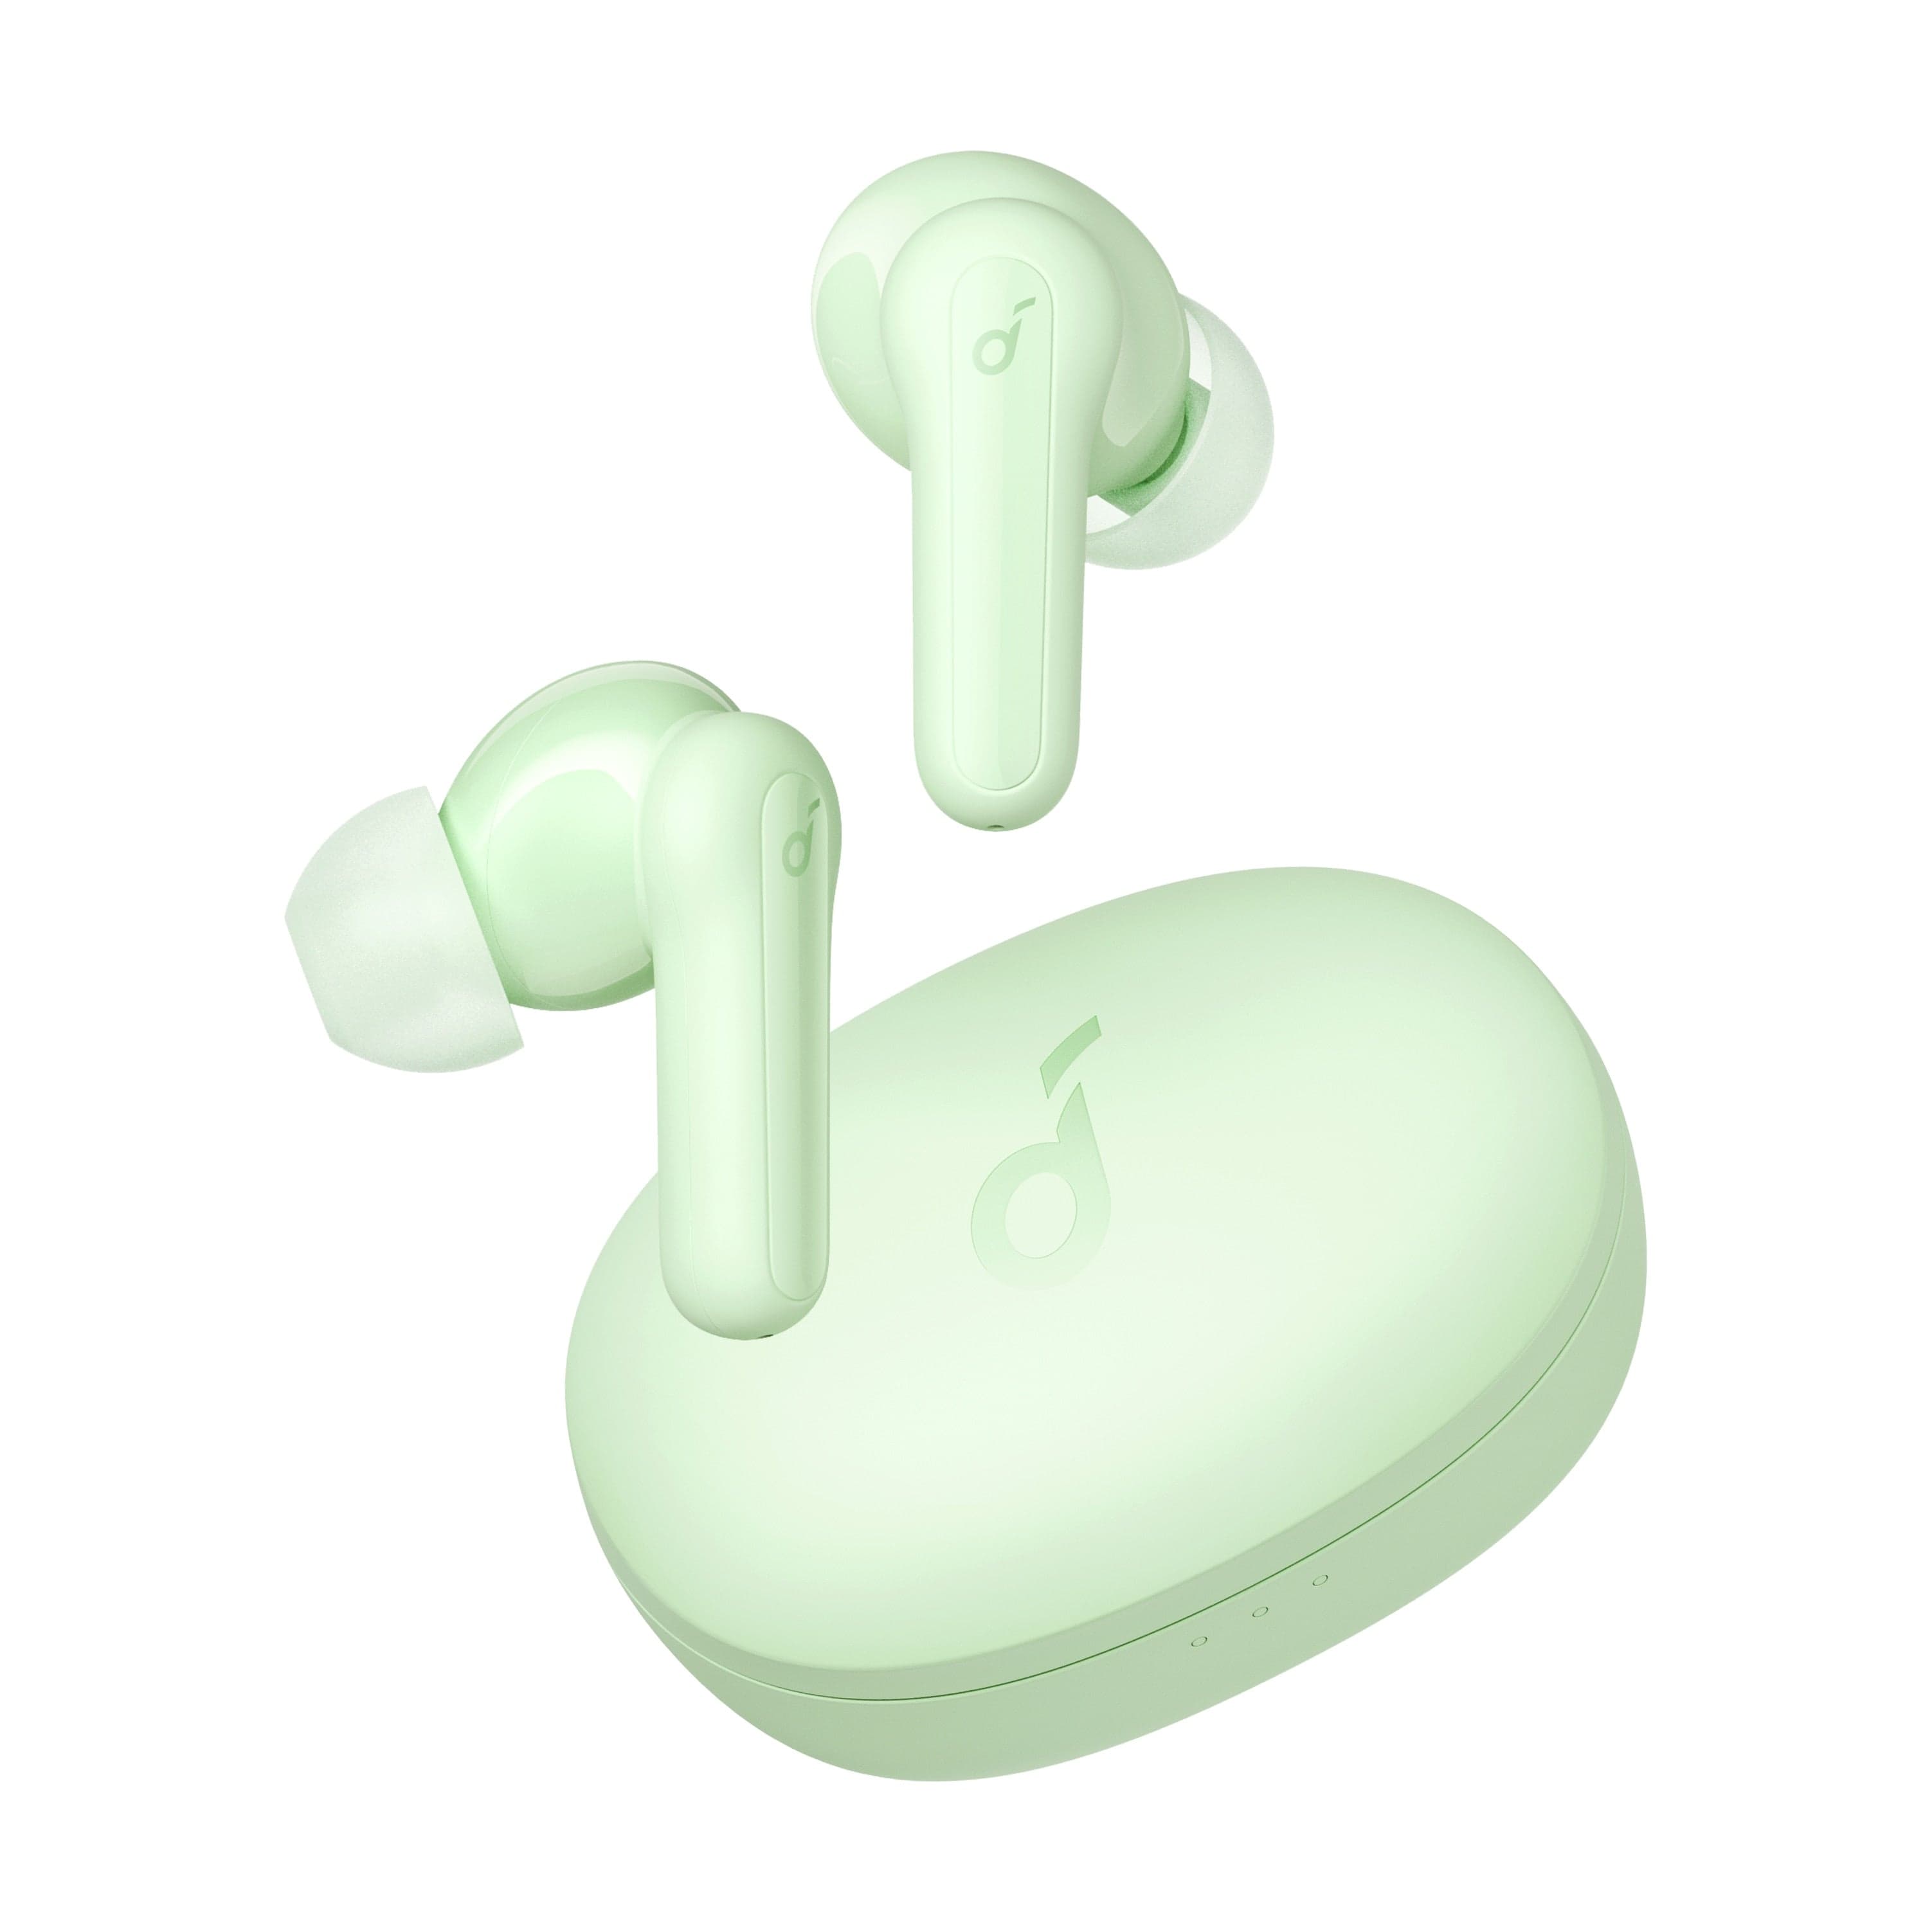 Soundcore Soundcore, Wireless Earbuds, Version Life P2 Mini True, Supports Bluetooth 5.2, Playtime up to 32 Hours, Color Green